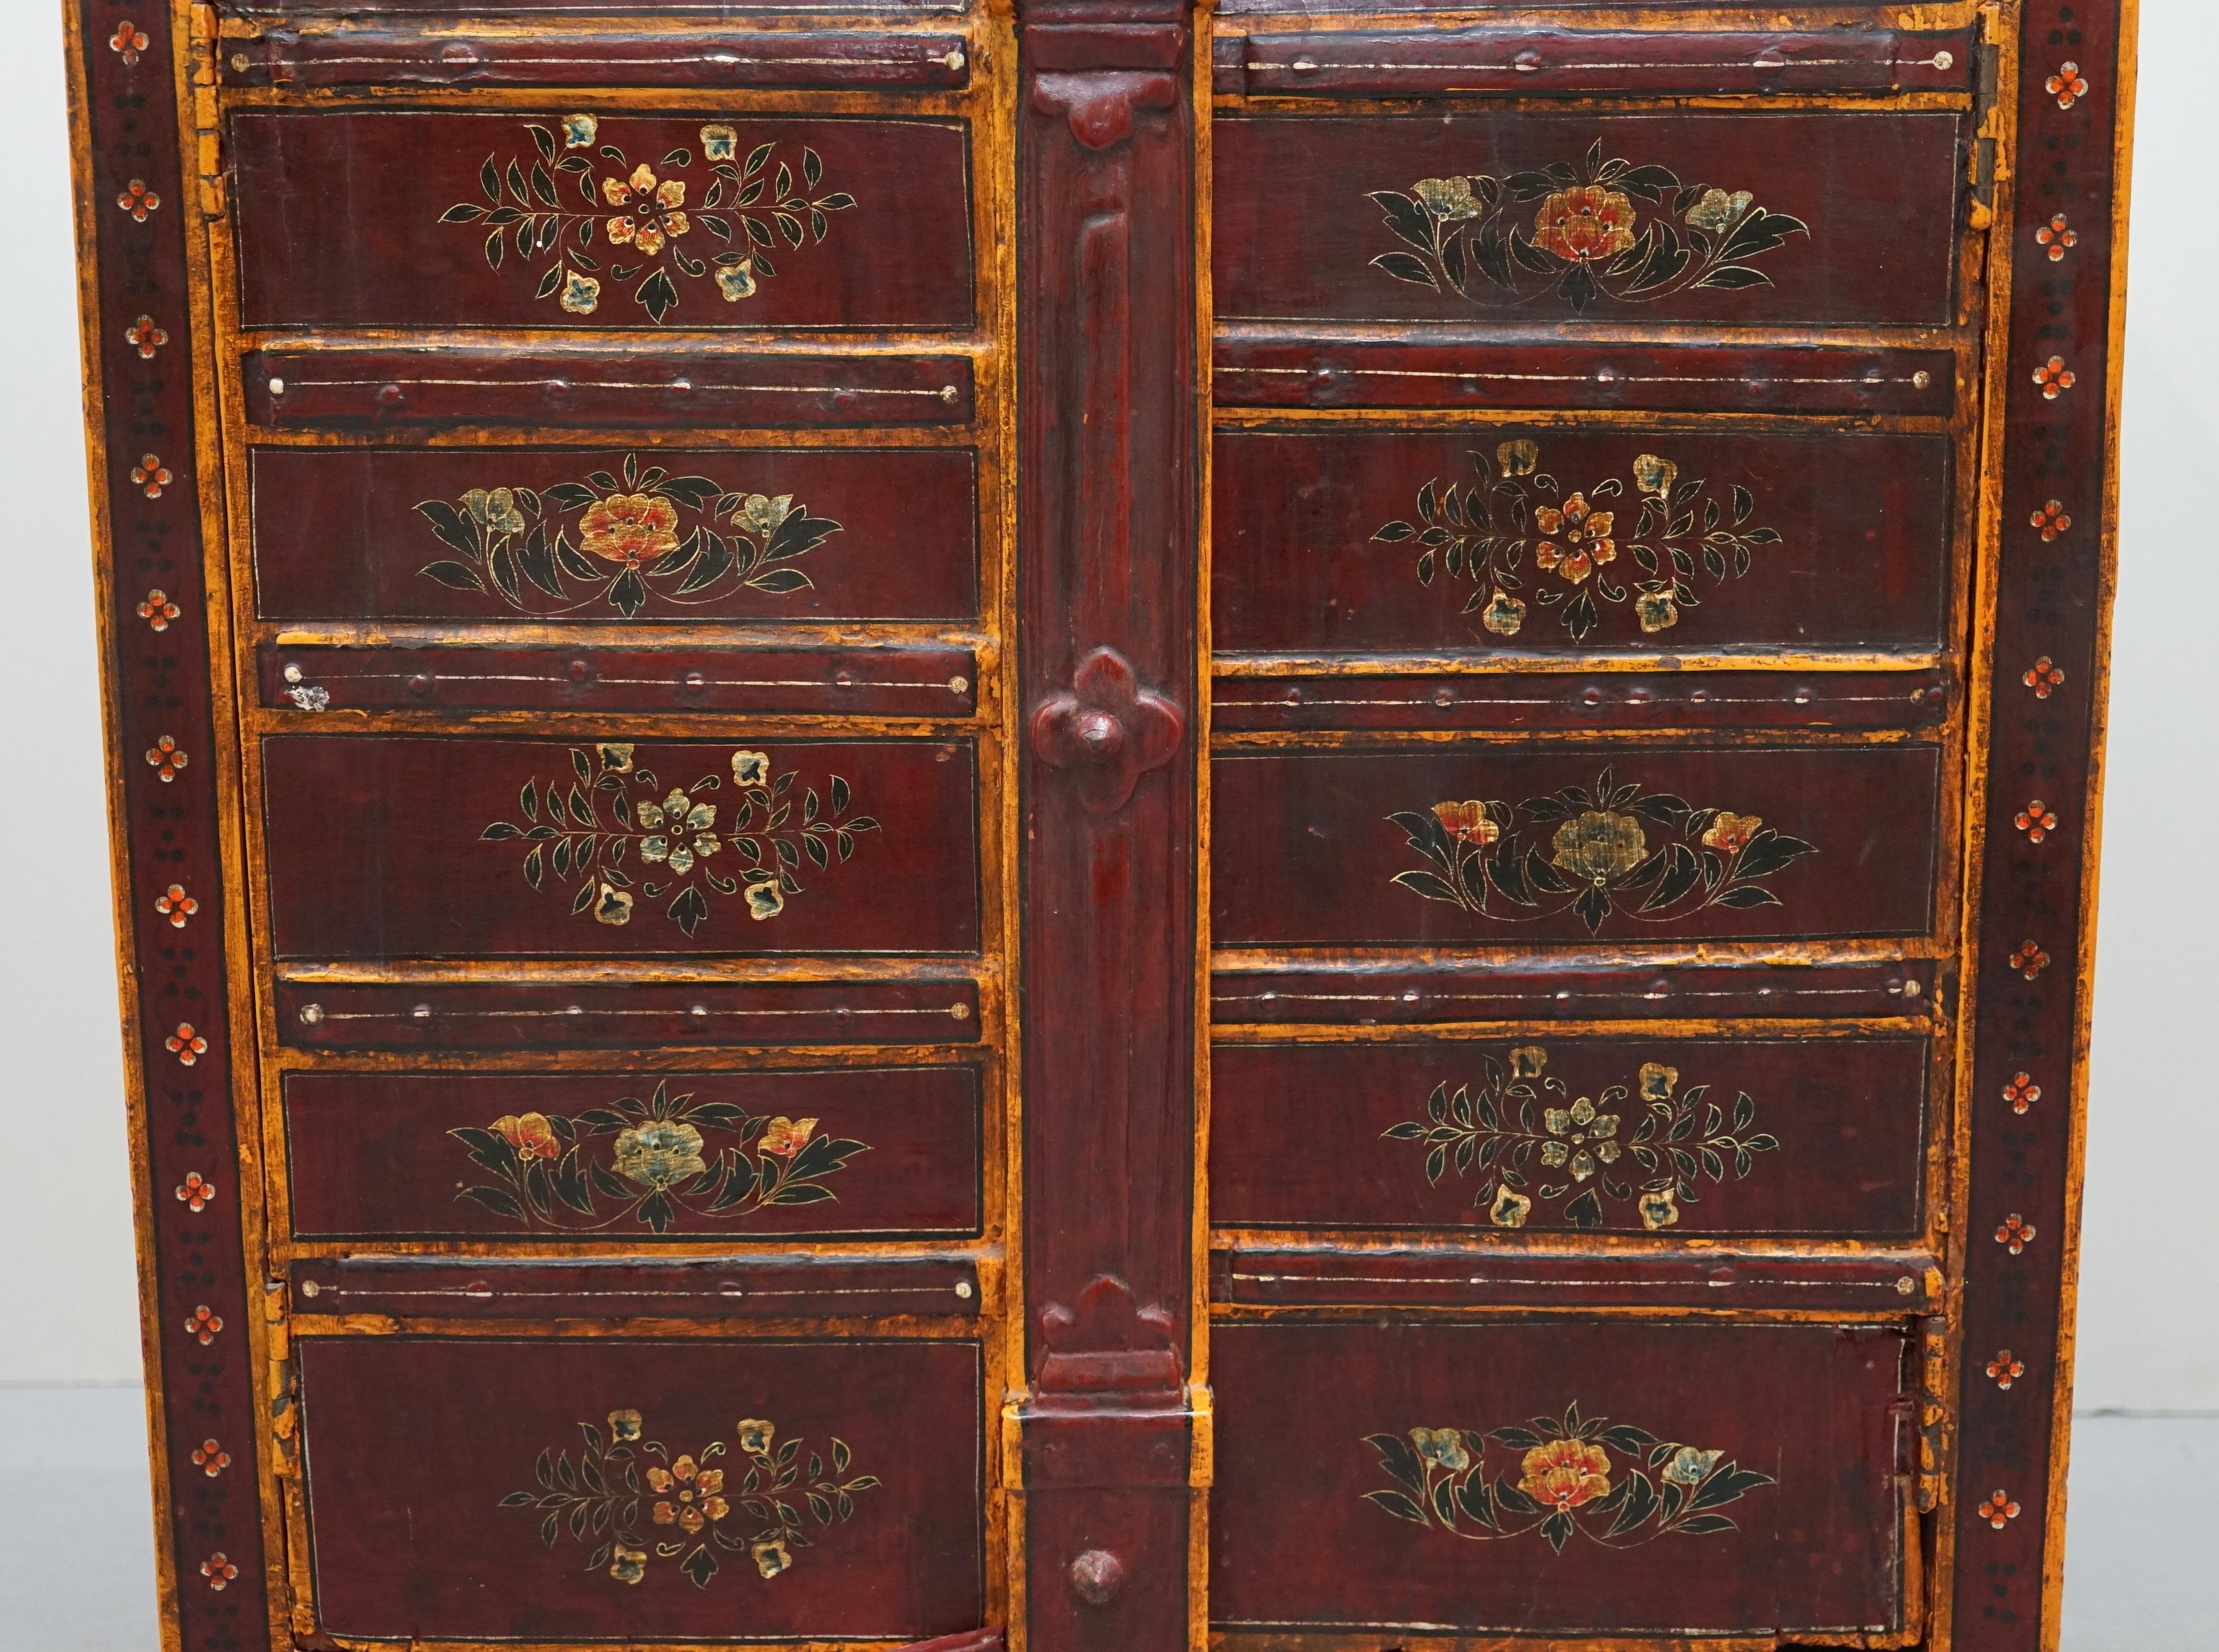 Early 20th Century Lovely circa 1900 Oriental Hand Painted Side Cupboard Bookcase Metal Strap Work For Sale